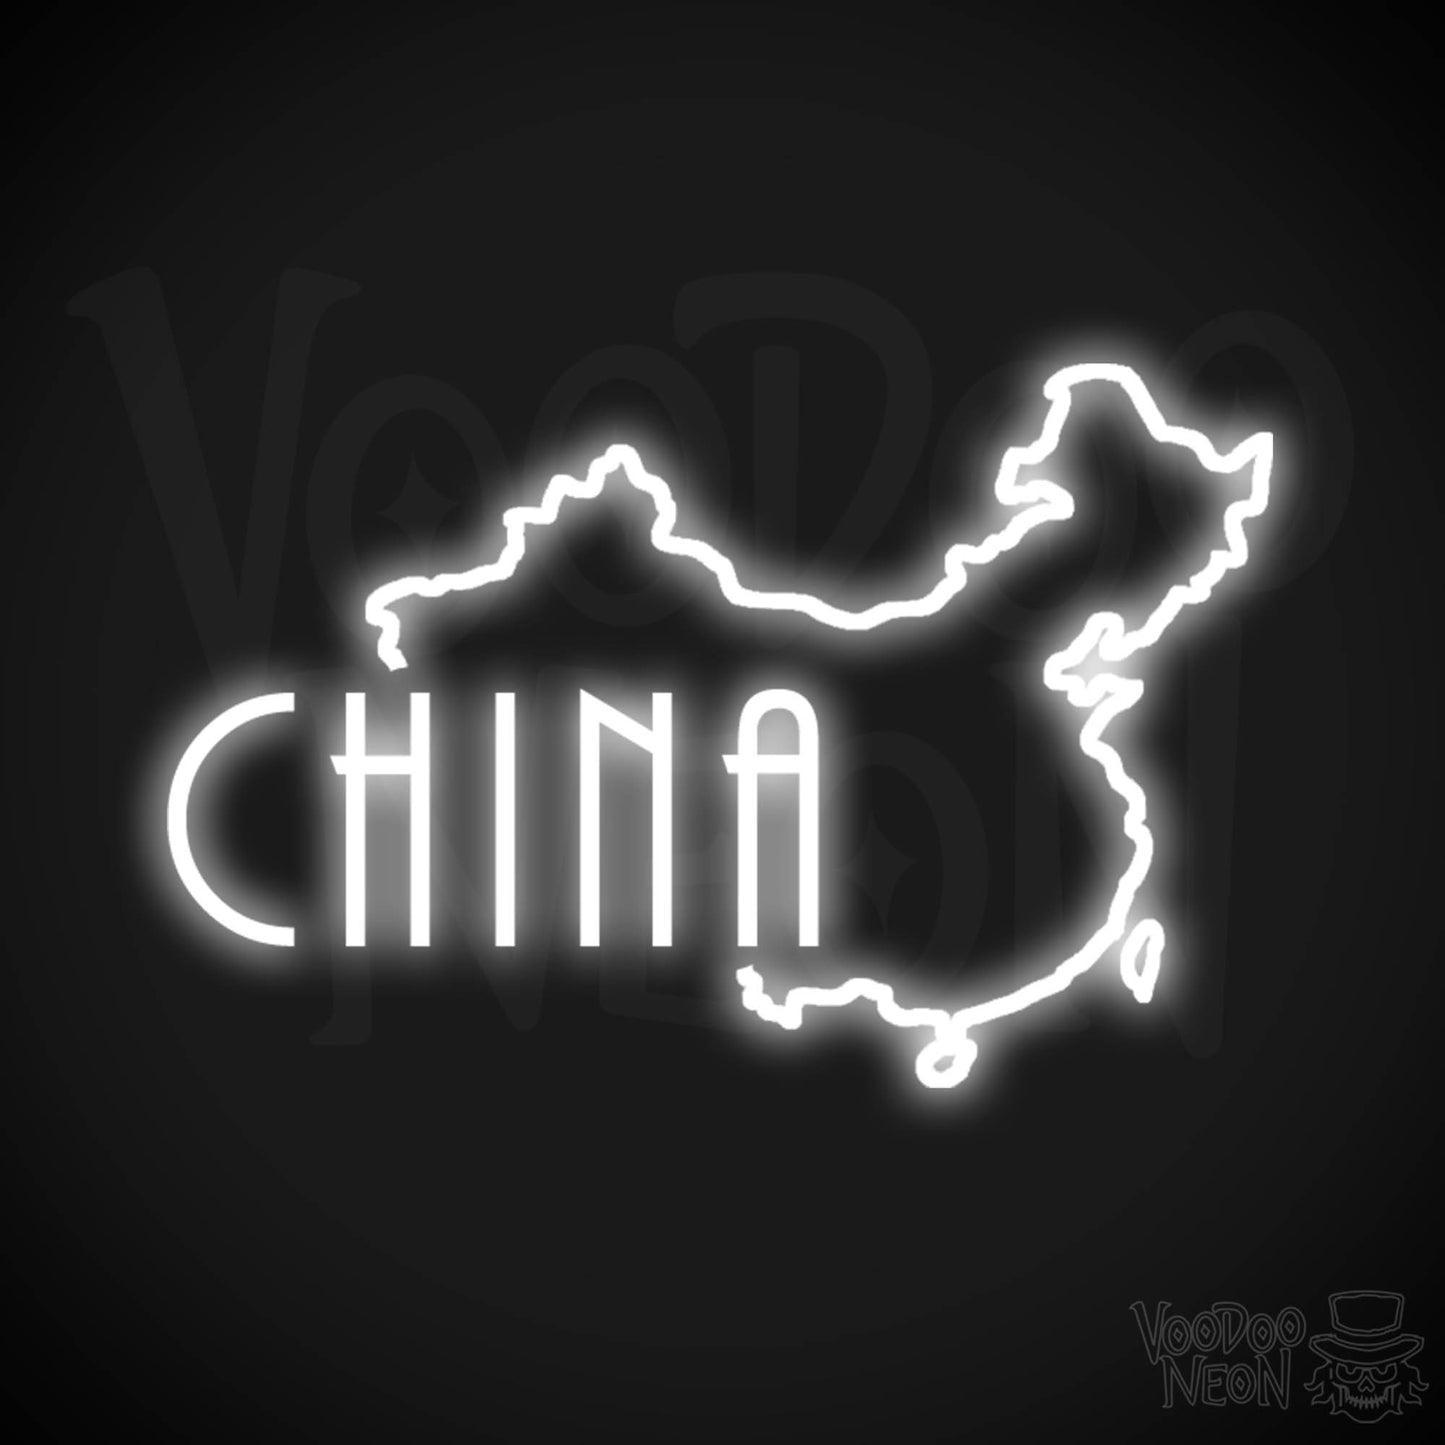 China Neon Sign - Neon China Sign - LED Sign - Color White